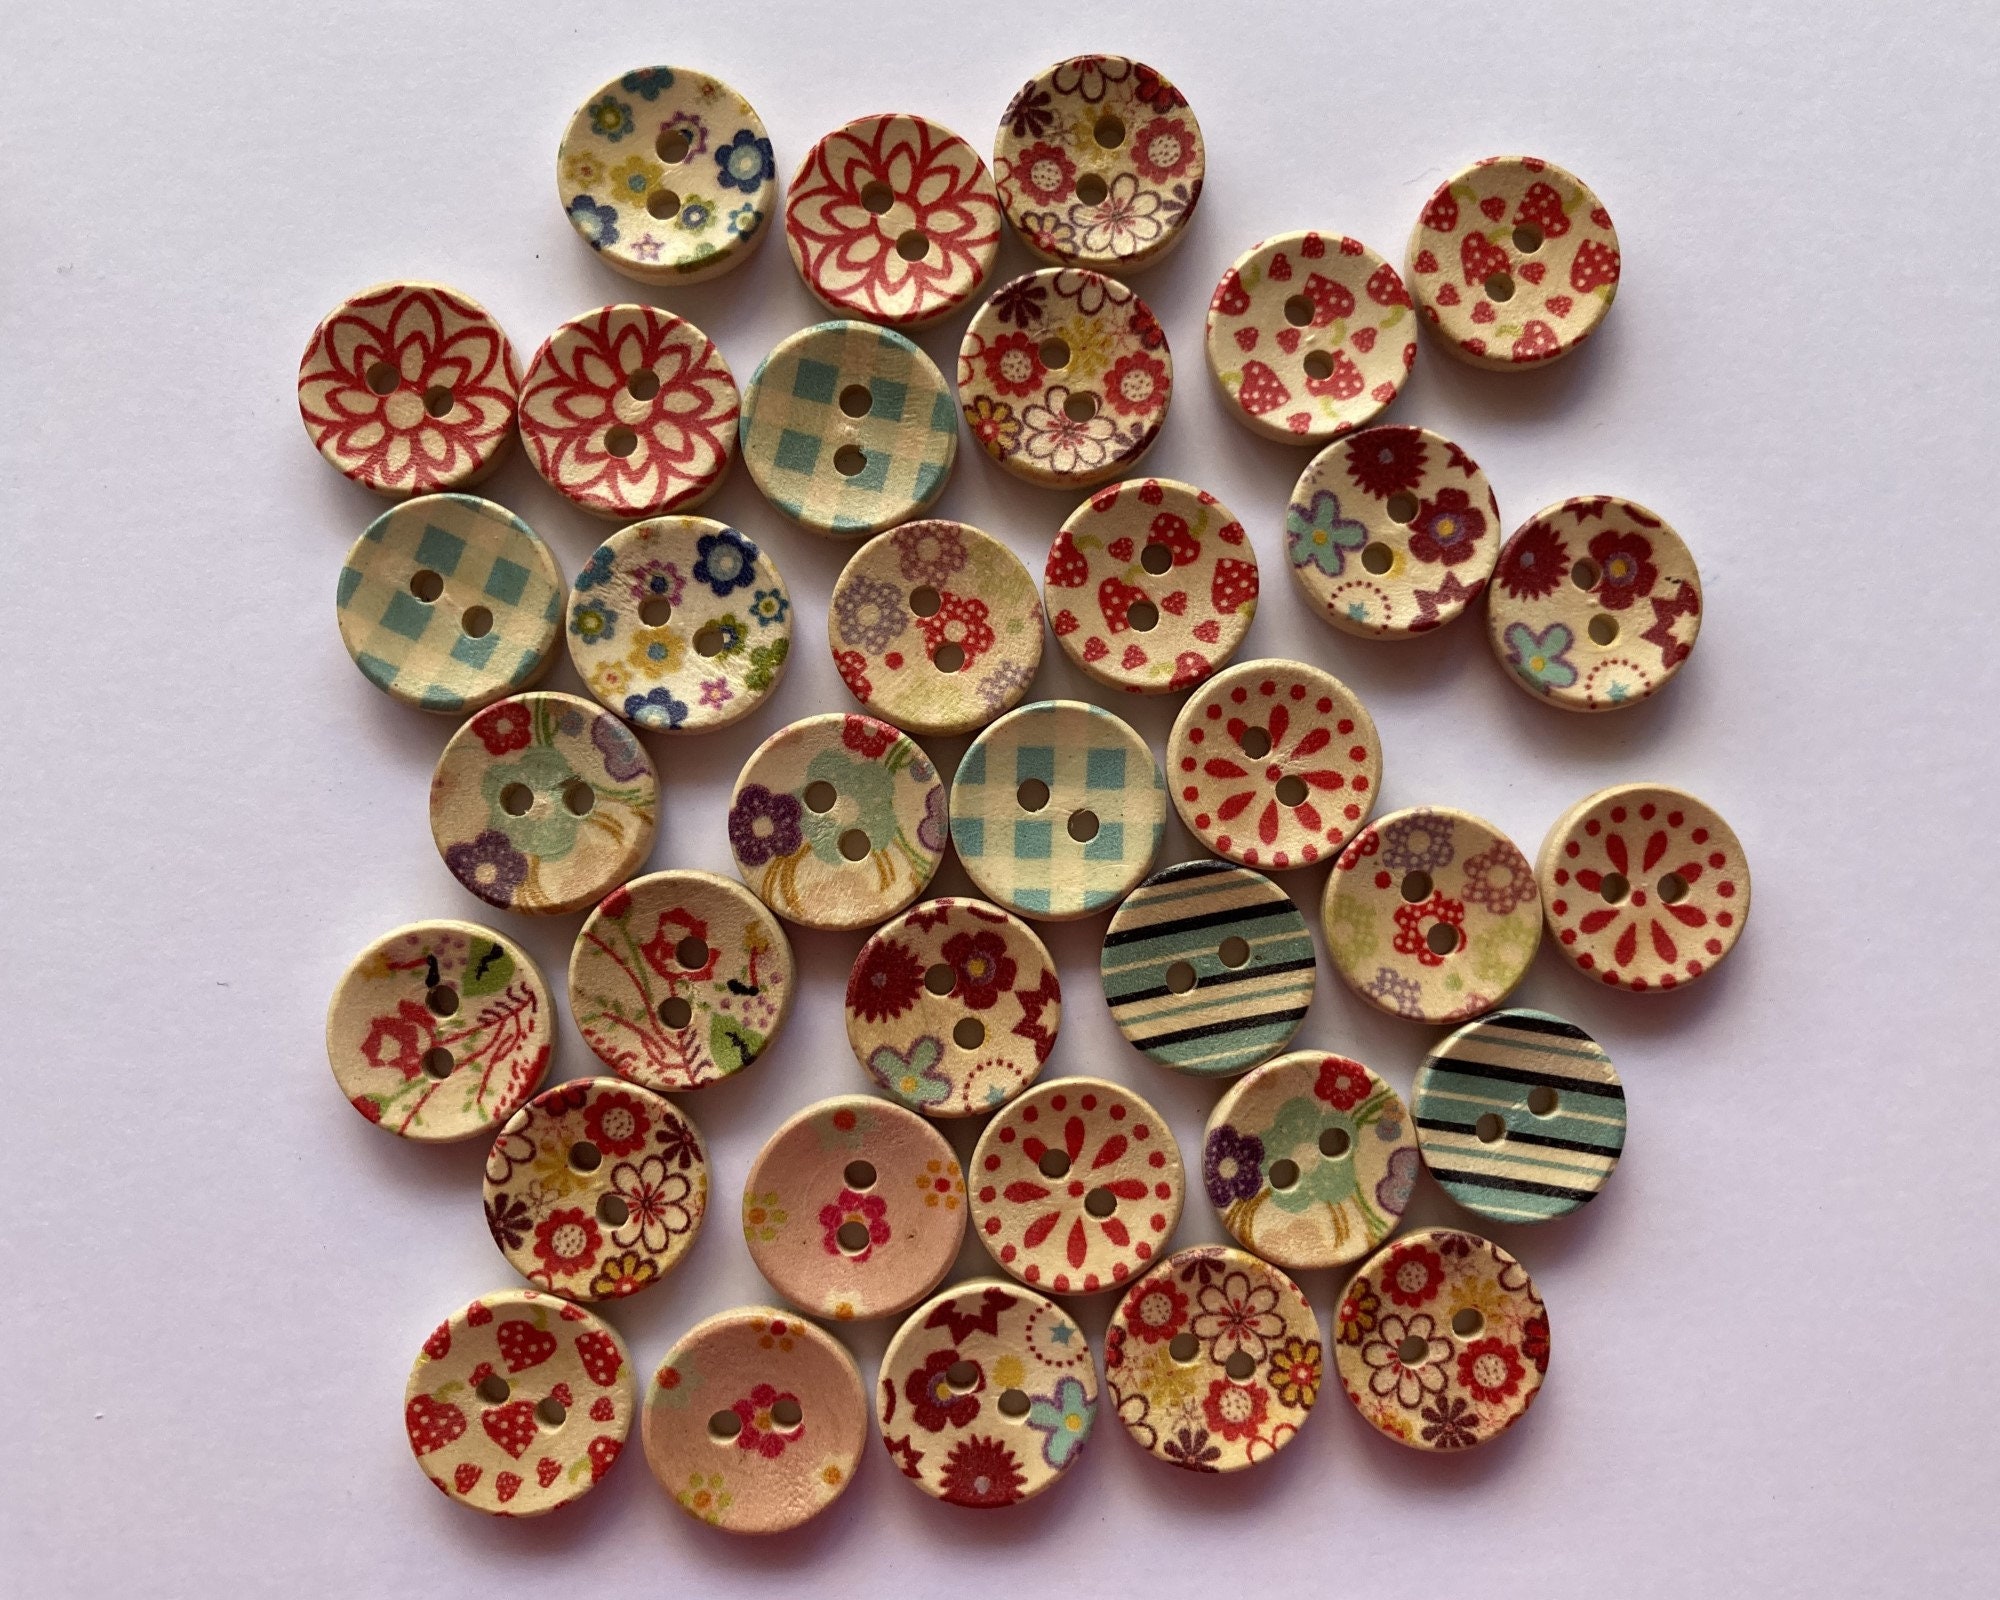 20 pcs Big buttons 4 holes size 33 mm mix assorted 20 colors for sewing  crafts